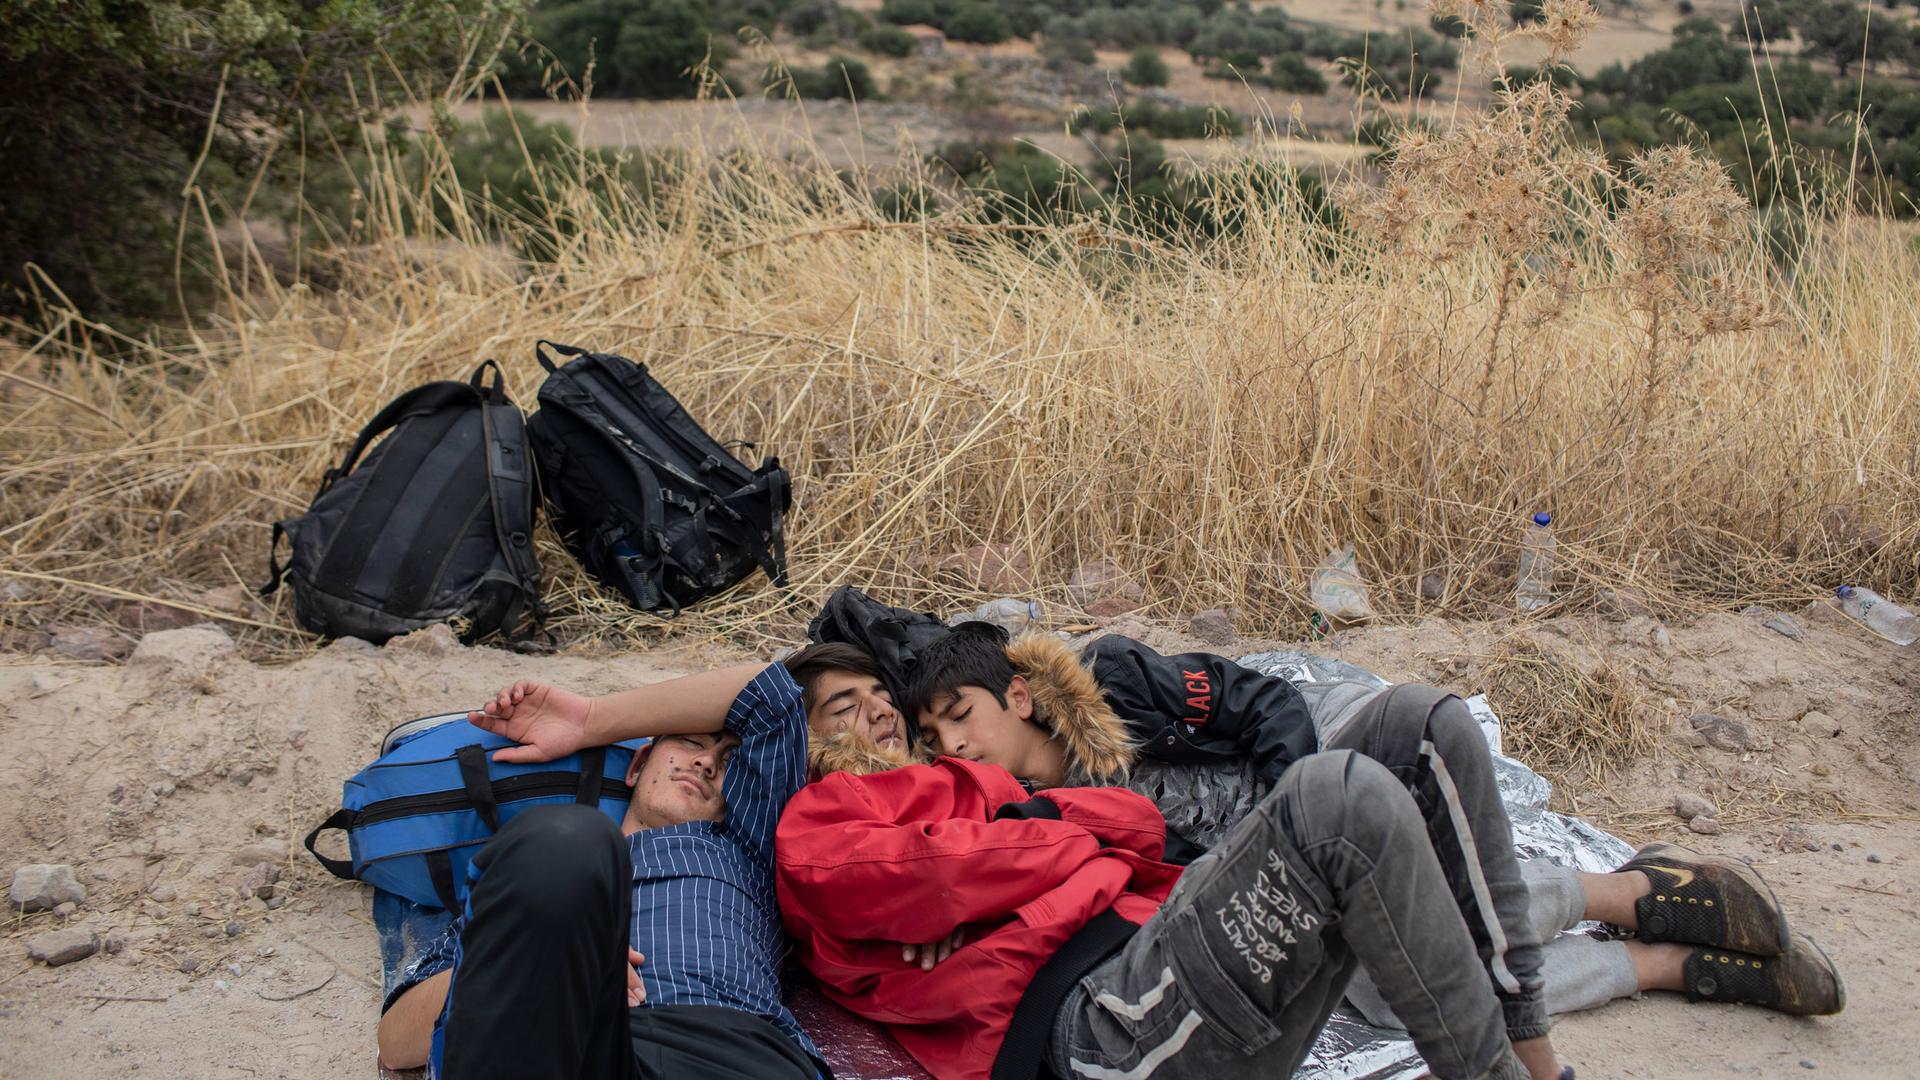 In this Monday, Oct. 7, 2019 photo, exhausted Afghan youths sleep on the ground near the town of Madamados after their arrival with other migrants and refugees on a rubber boat from Turkey, at Lesbos Island, Greece.